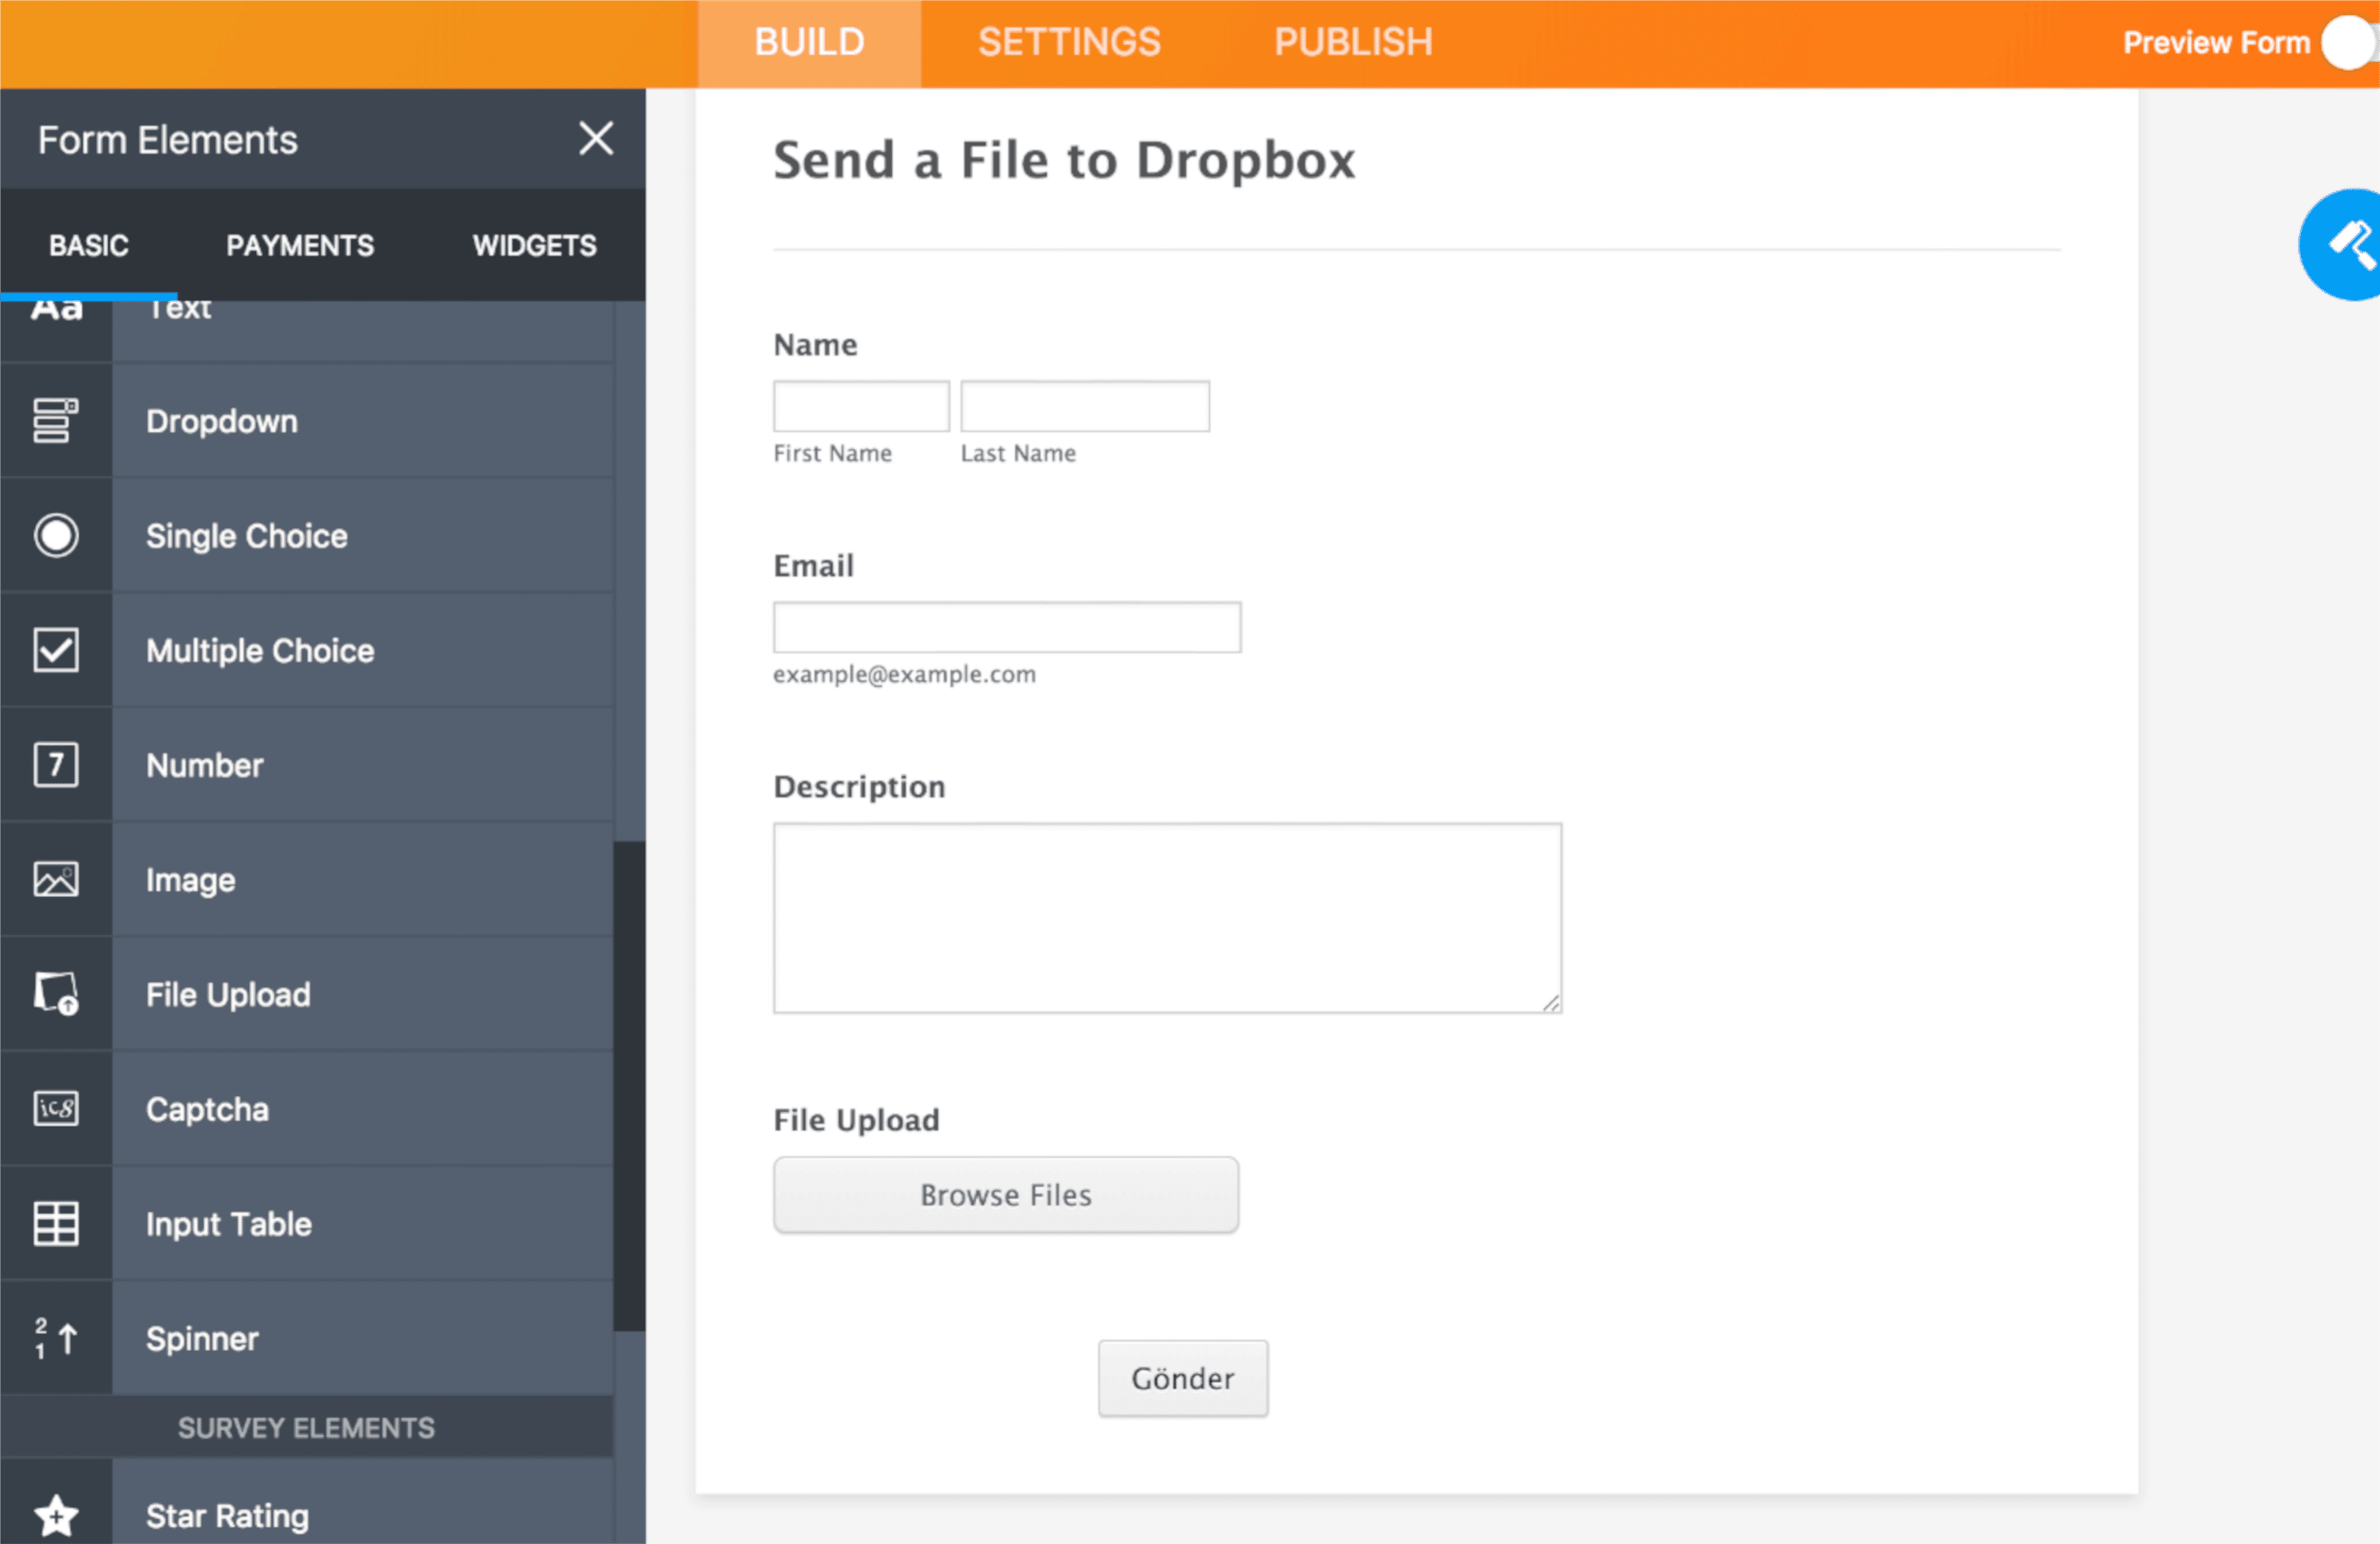 1. Create an Upload form first.